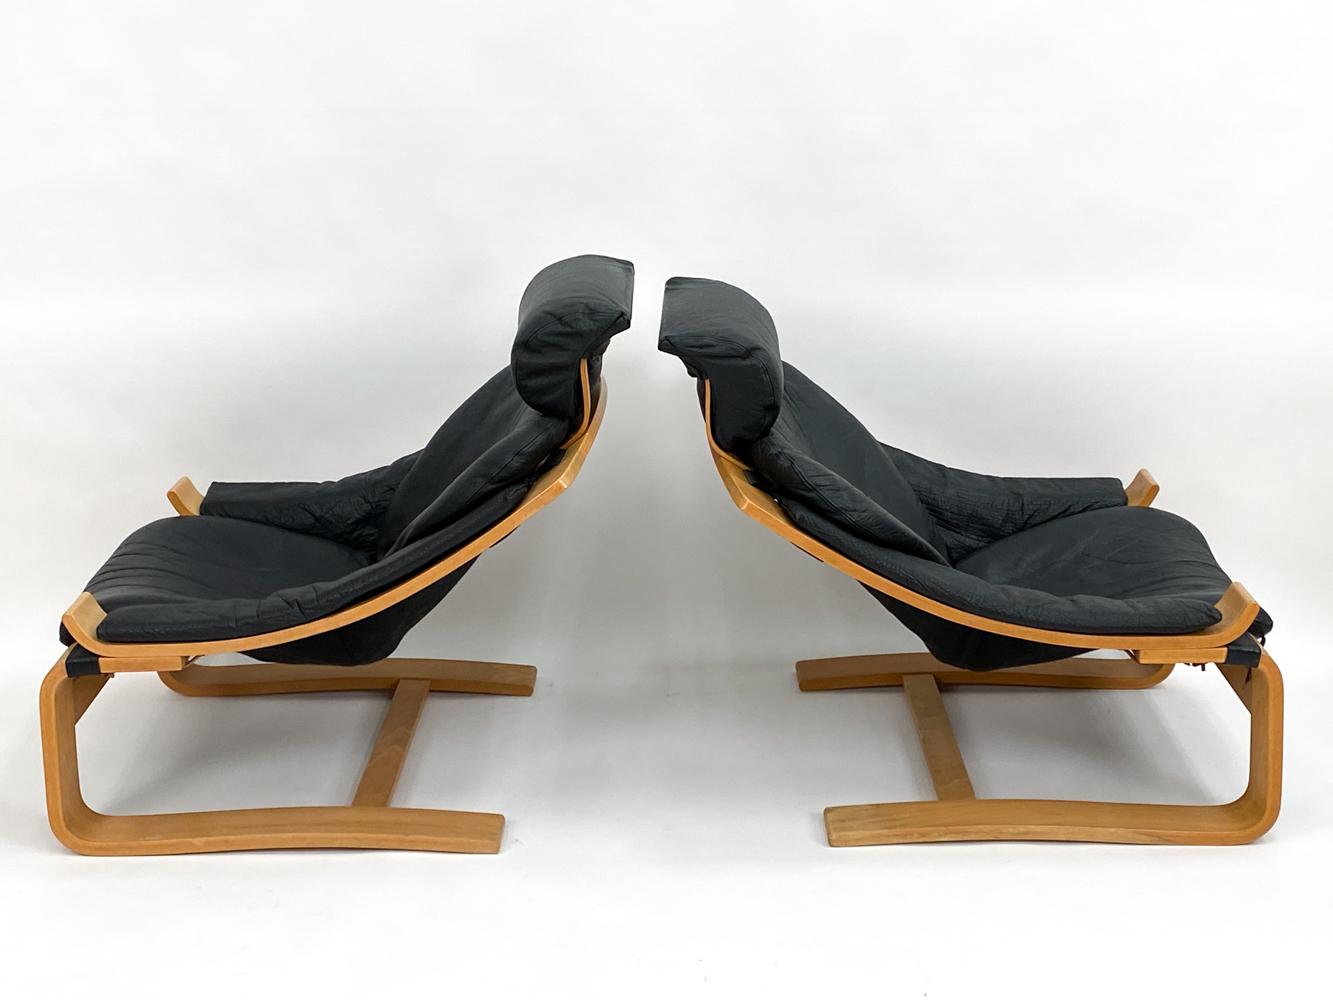 '4' Kroken Buffalo Leather Lounge Chairs by Åke Fribytter for Nelo Sweden, 1970s For Sale 2